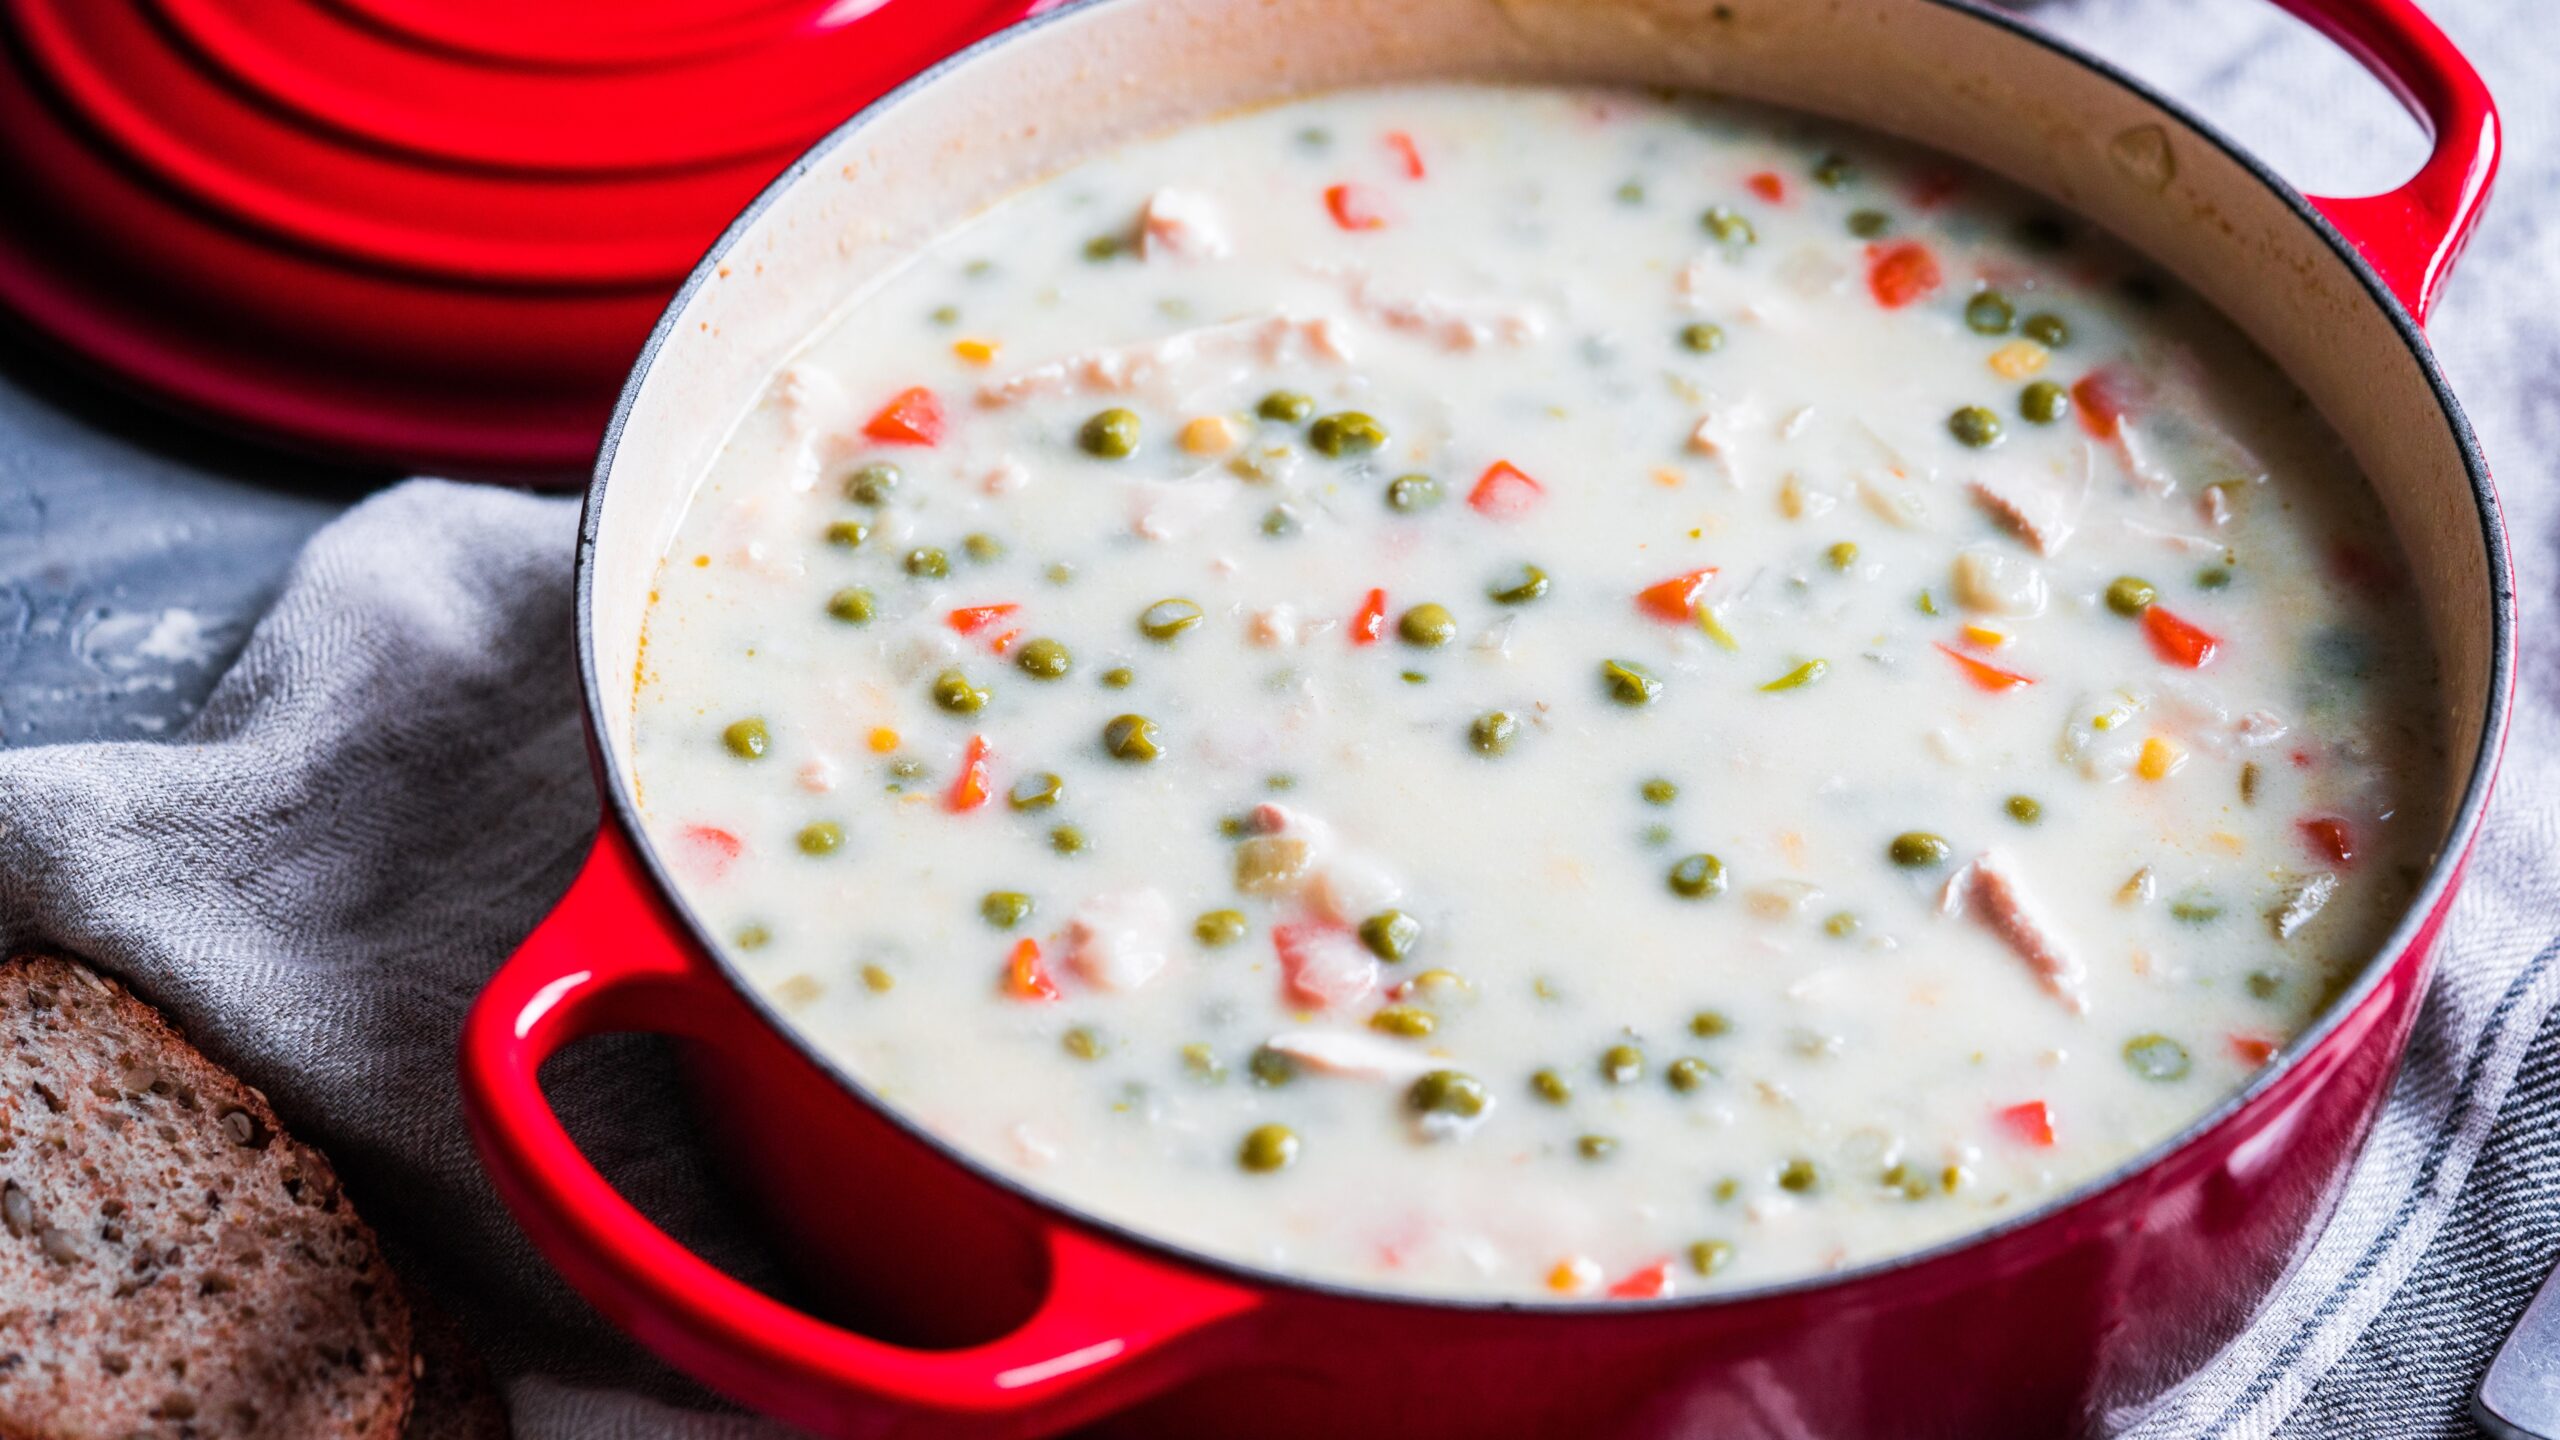  Creamy, hearty, and comforting chicken chowder perfect for chilly nights!